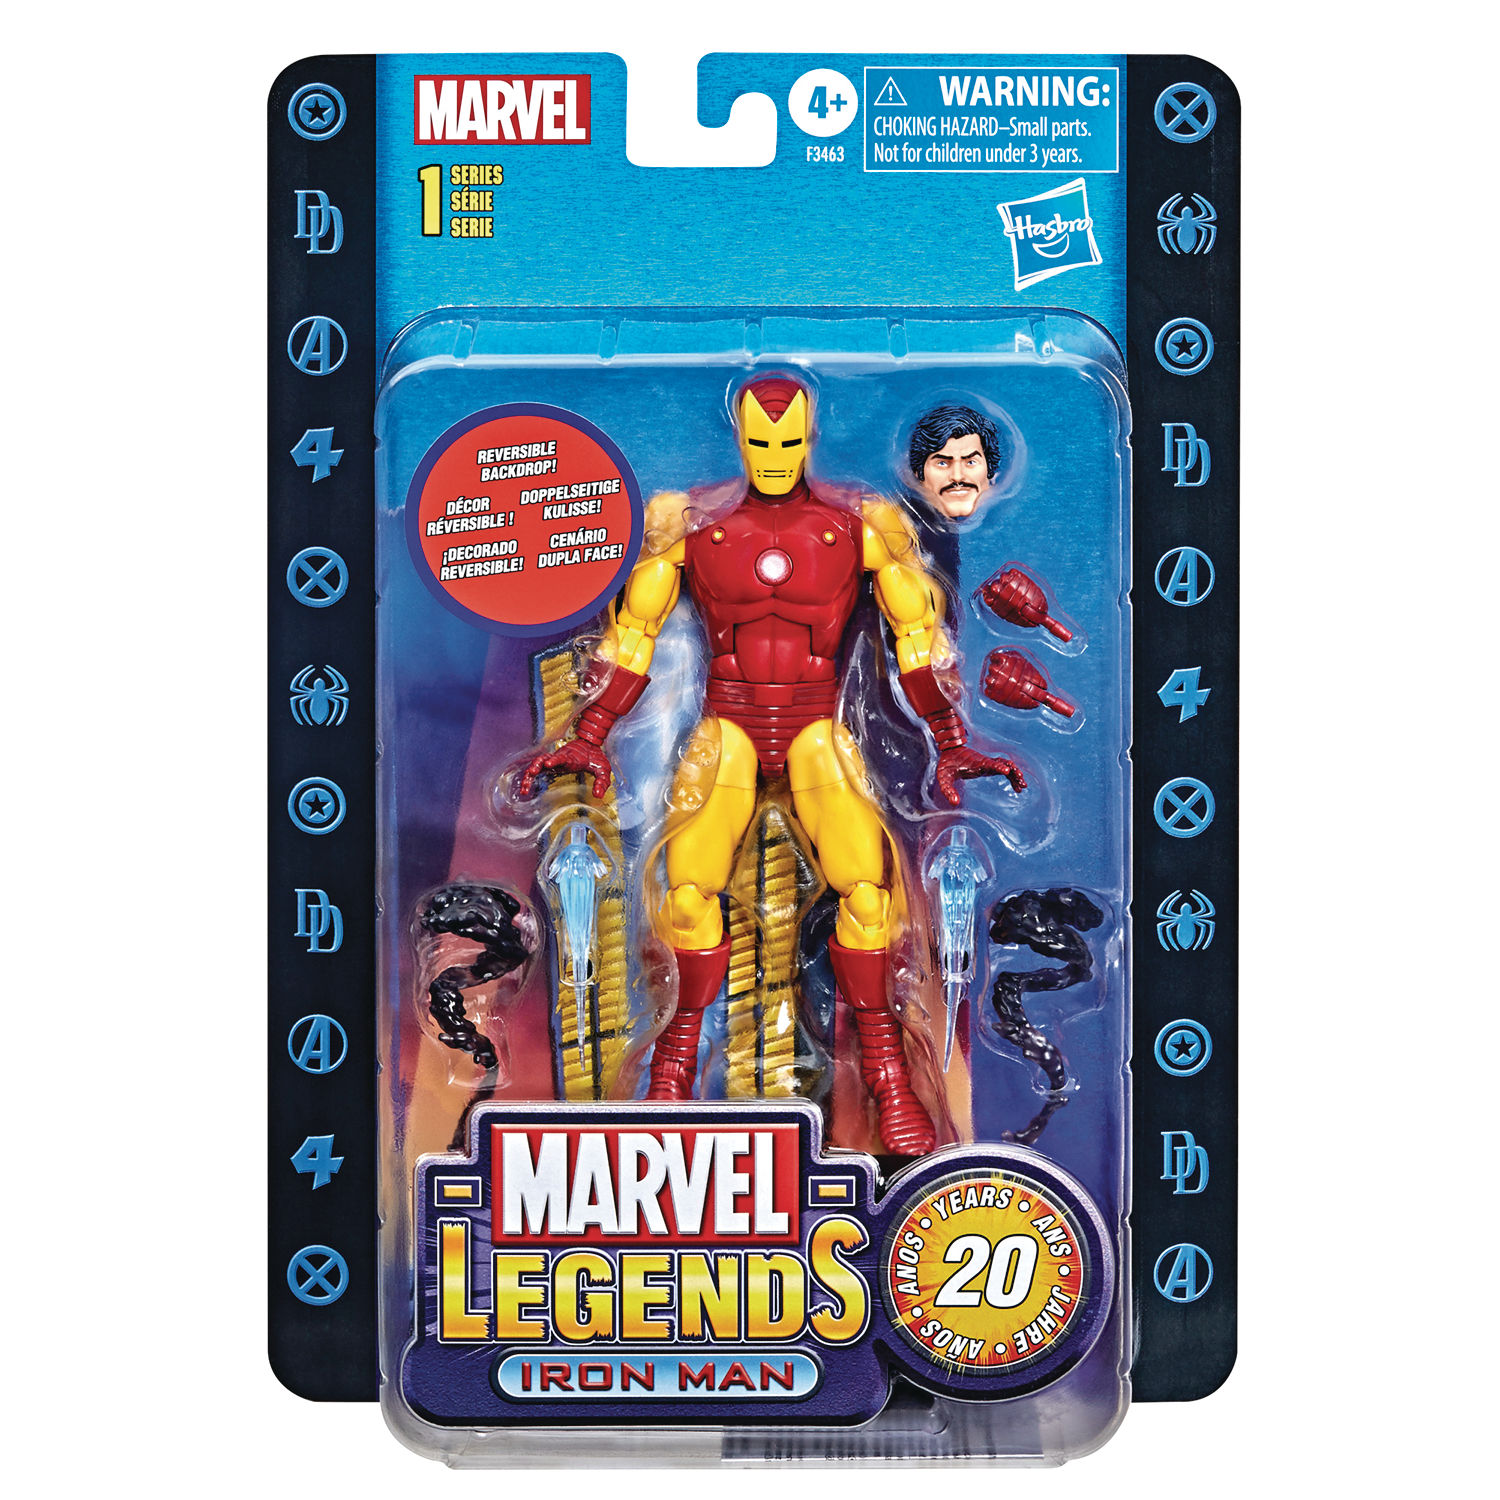 Marvel Legends 20th Anniversary Iron Man 6 Inch Action Figure Case